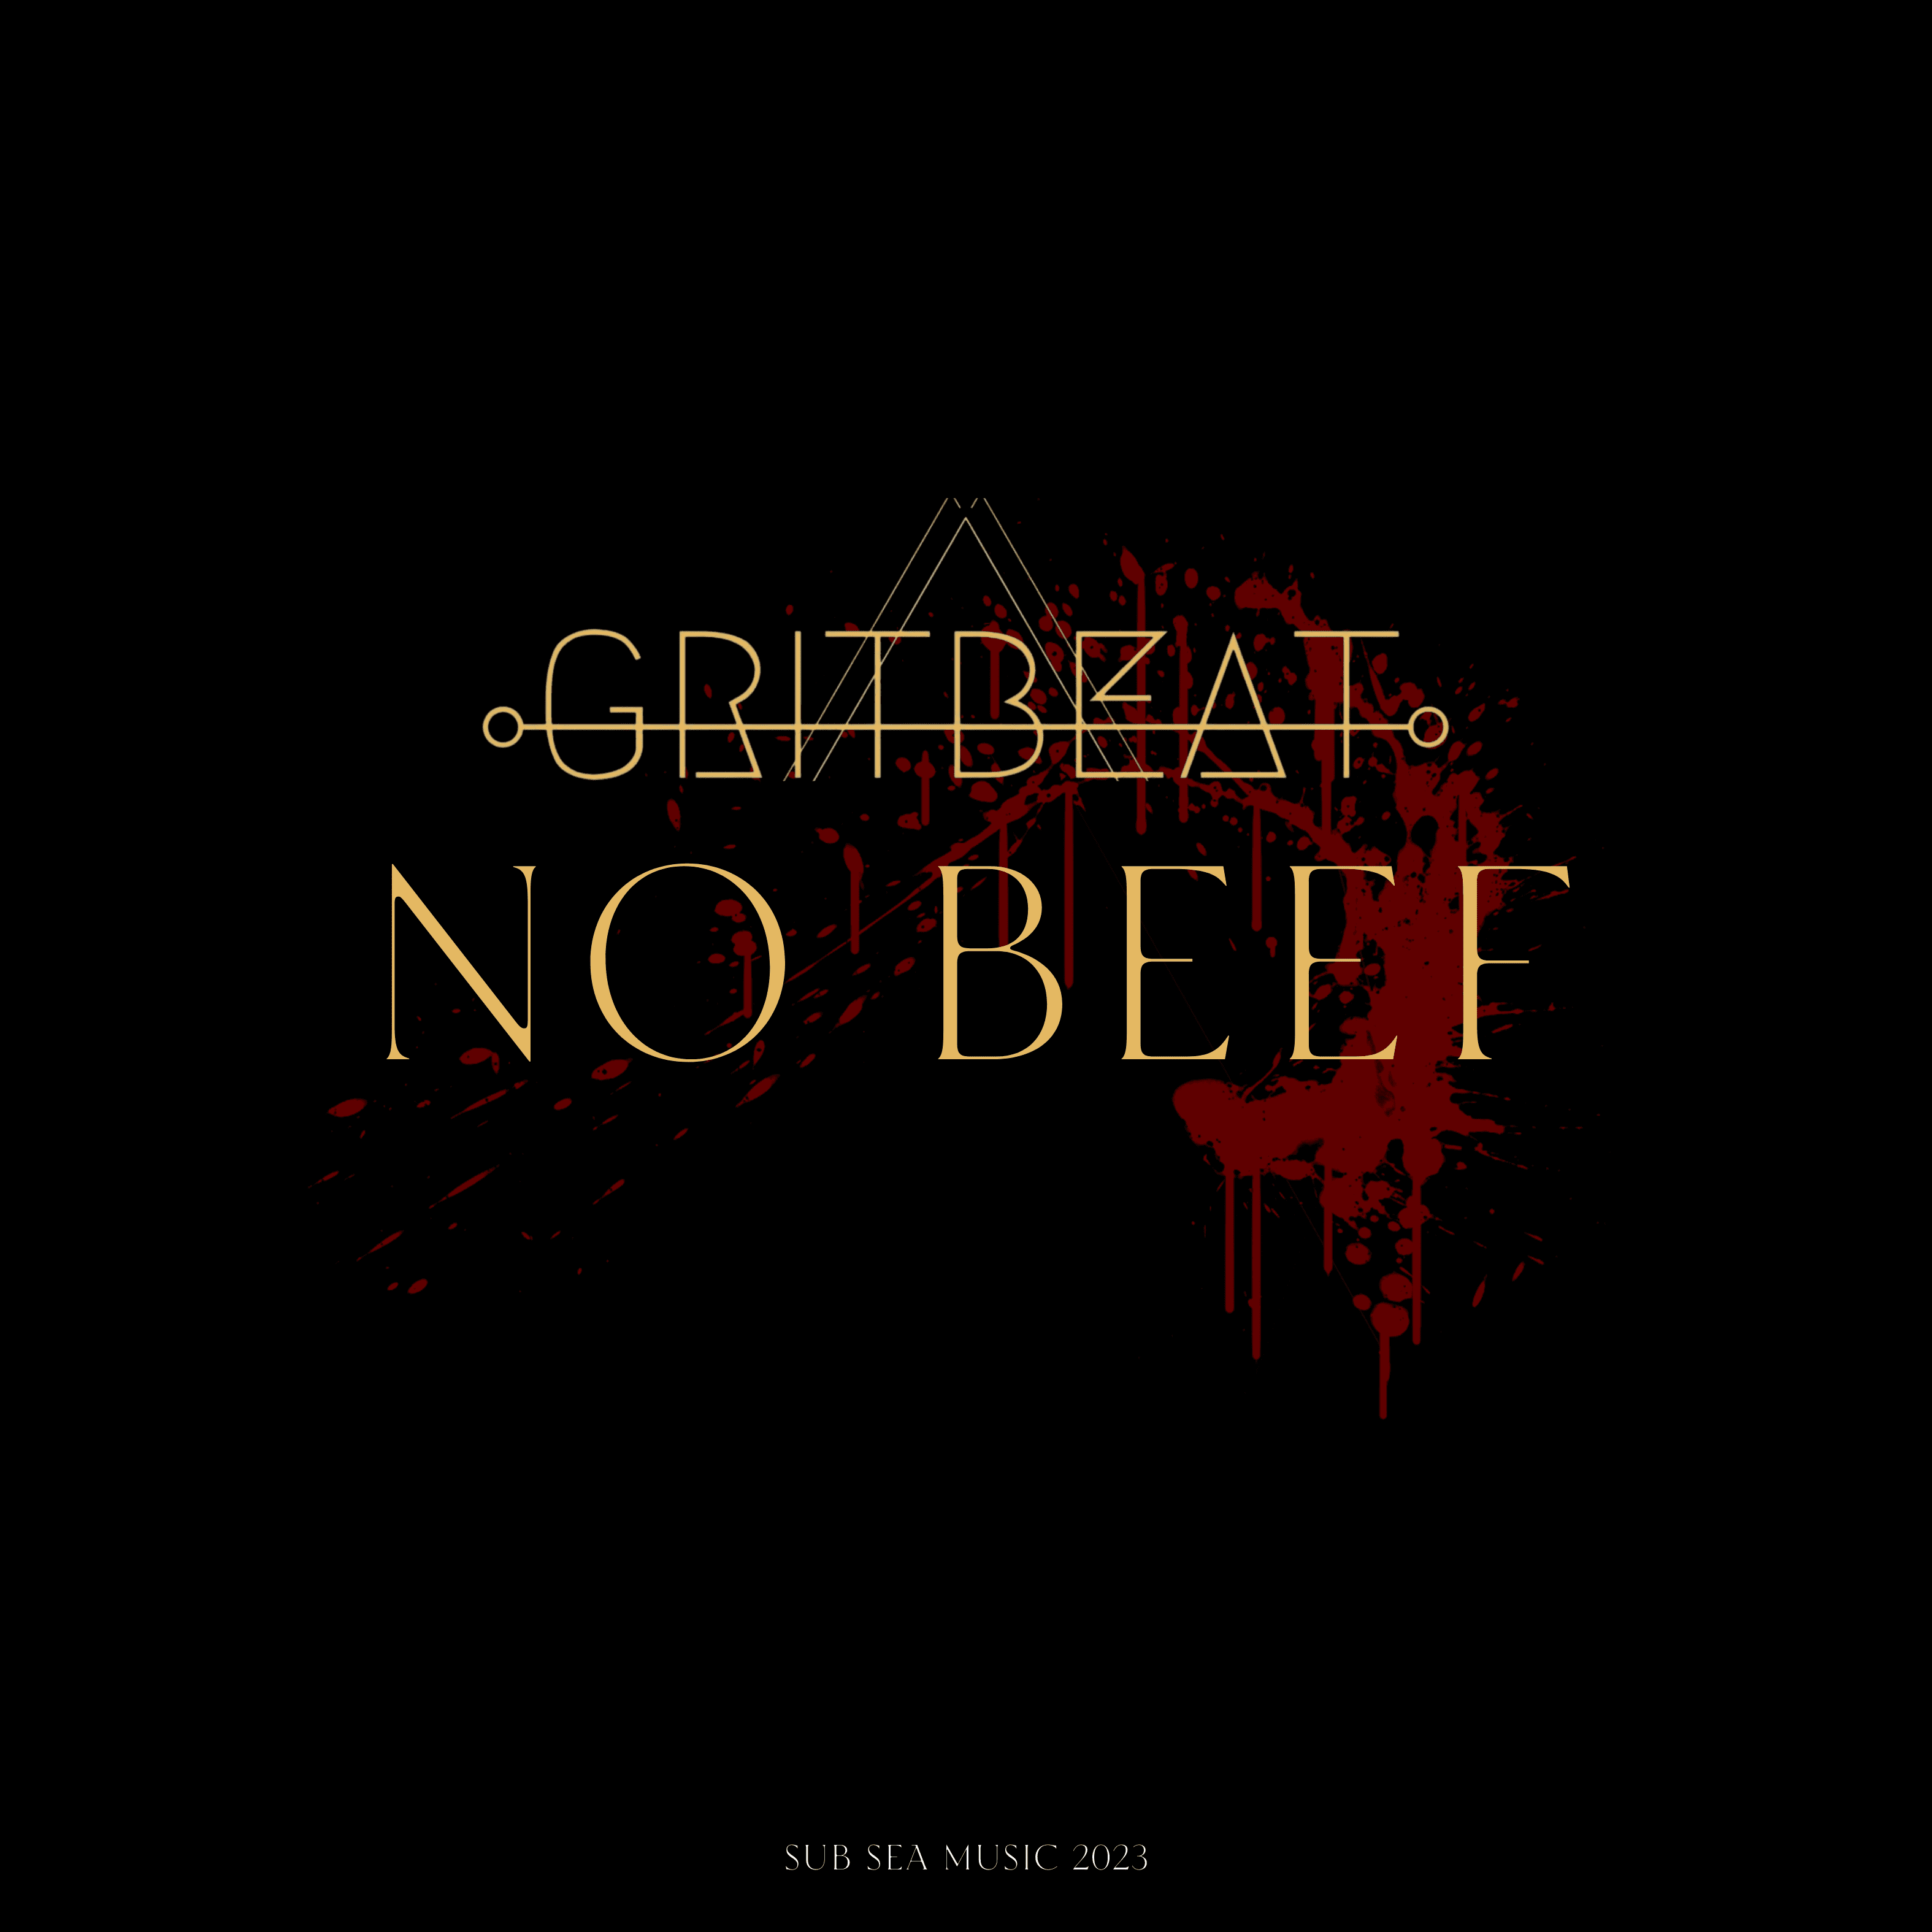 Cover art for NO BEEF by GritBeat